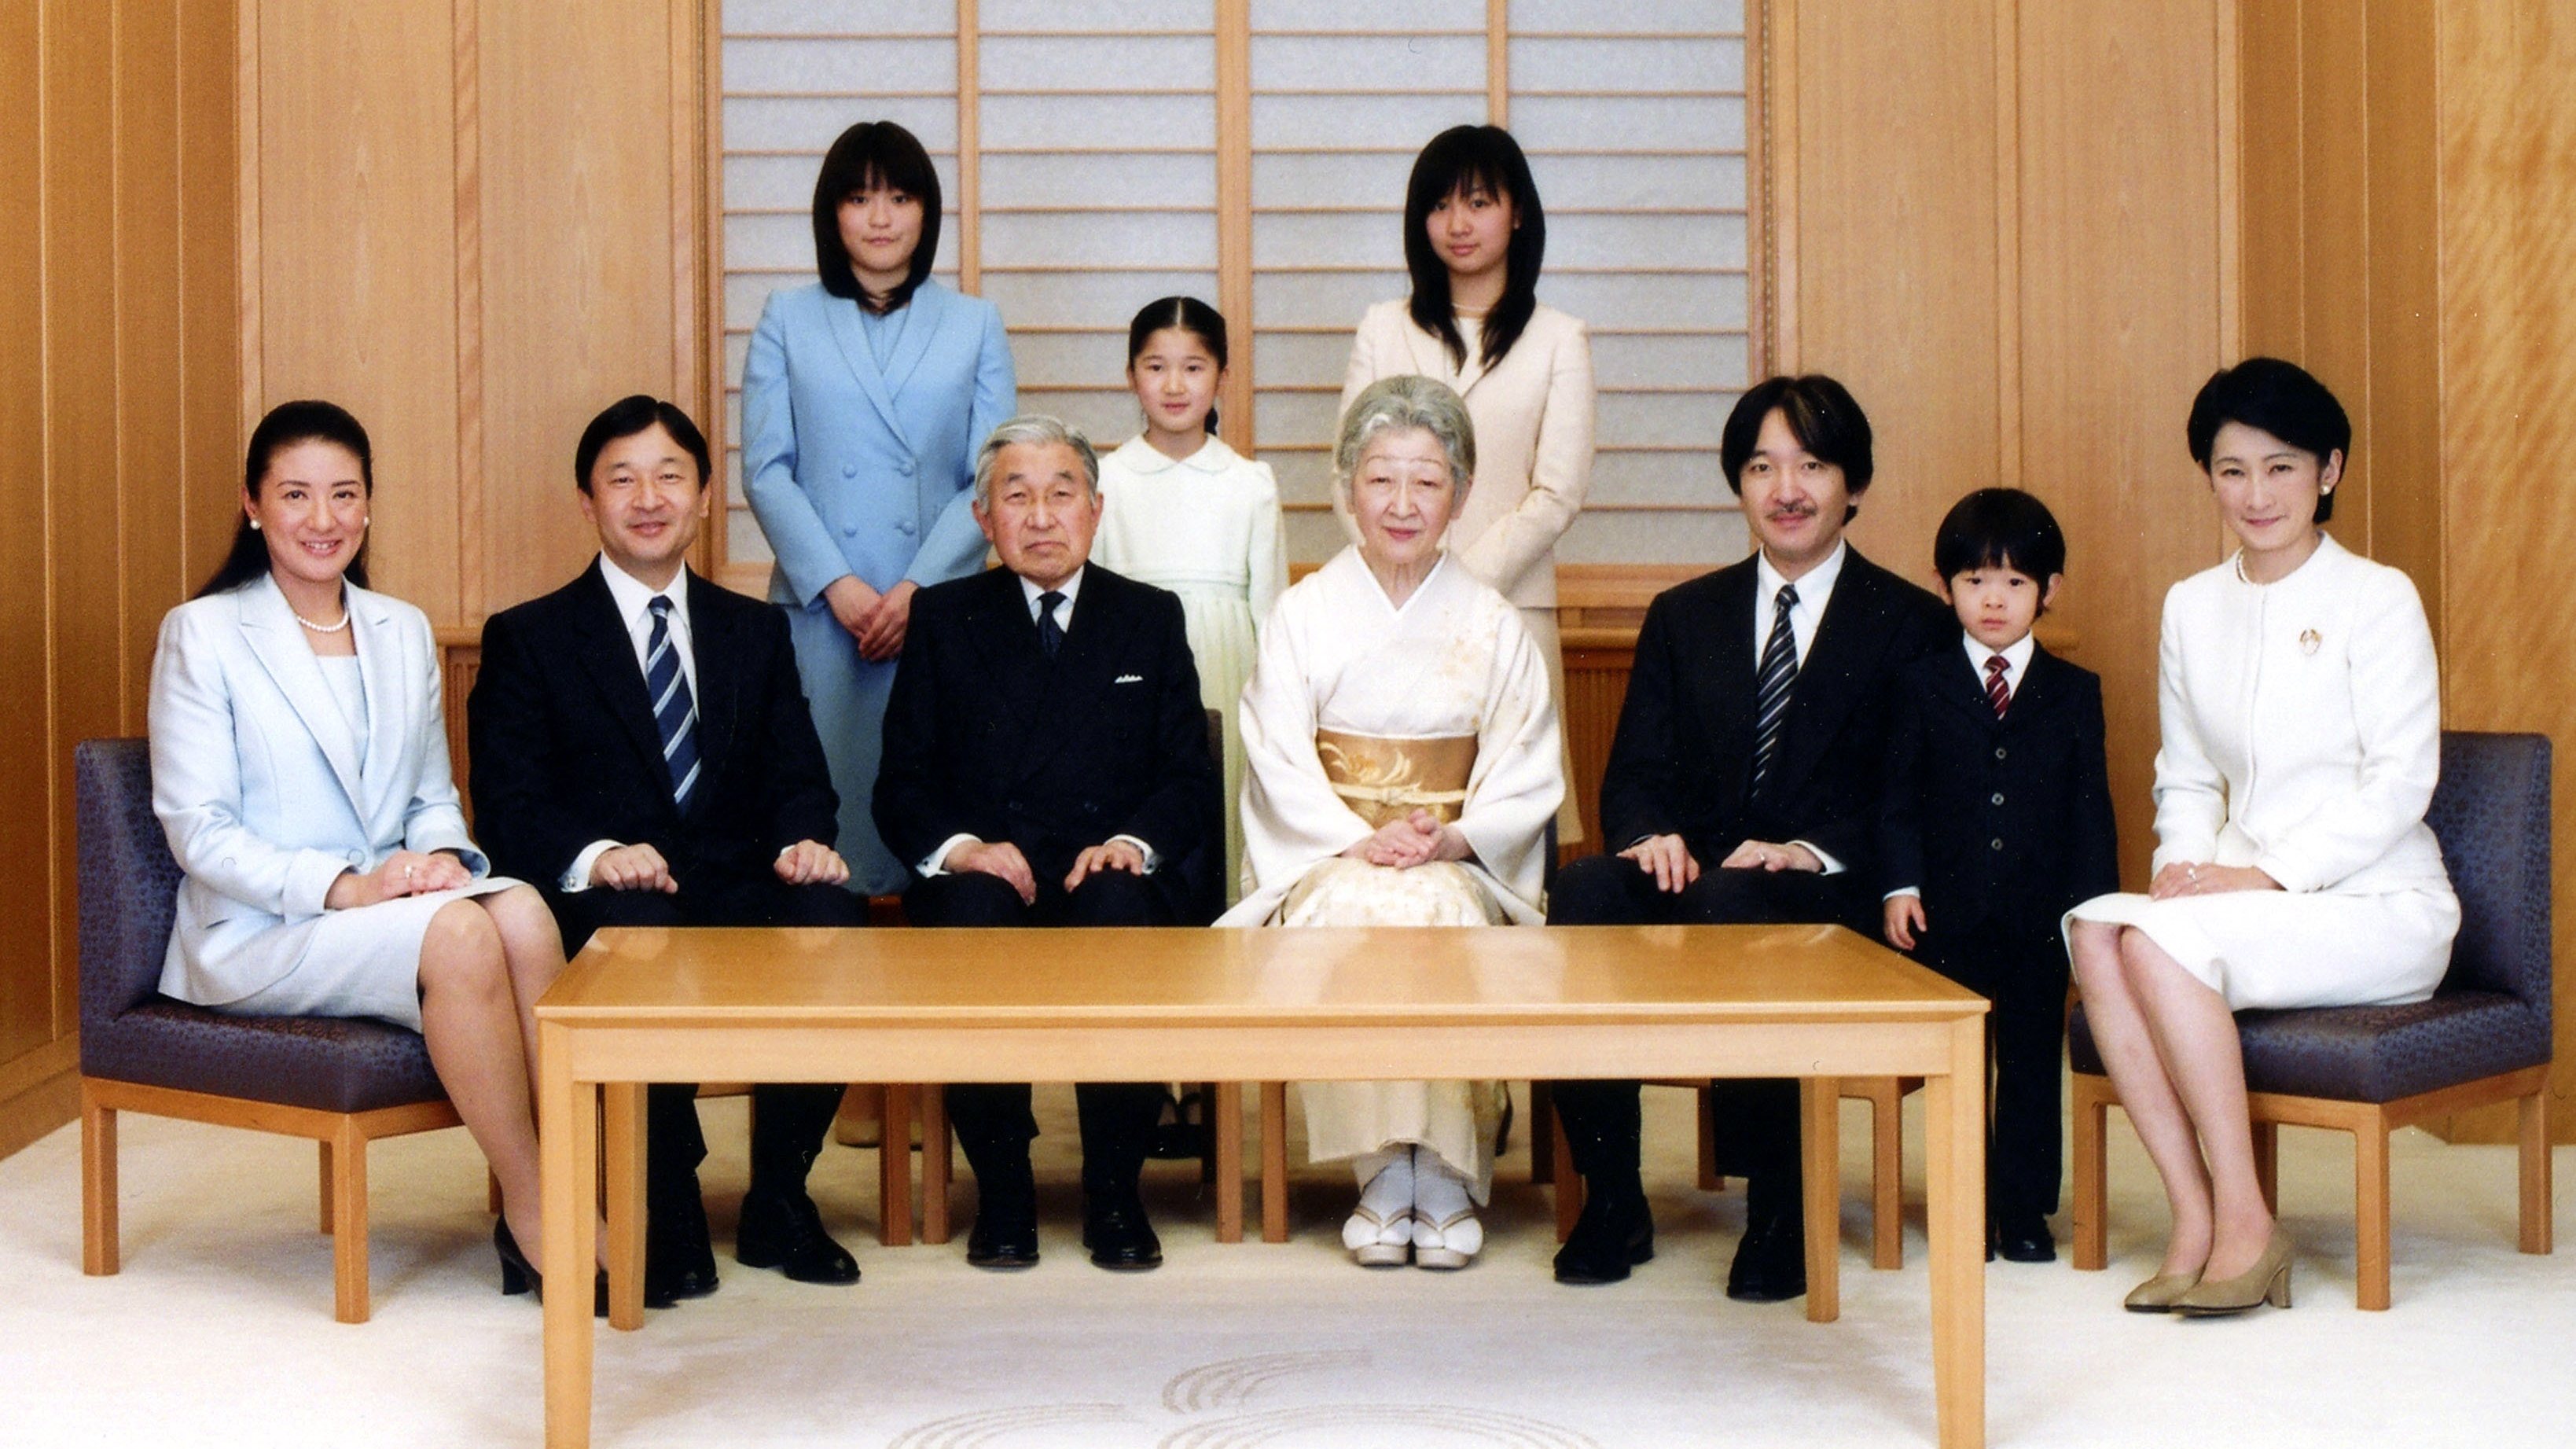 Japan Imperial Family Annual Official Photo Session For The New Year 2011